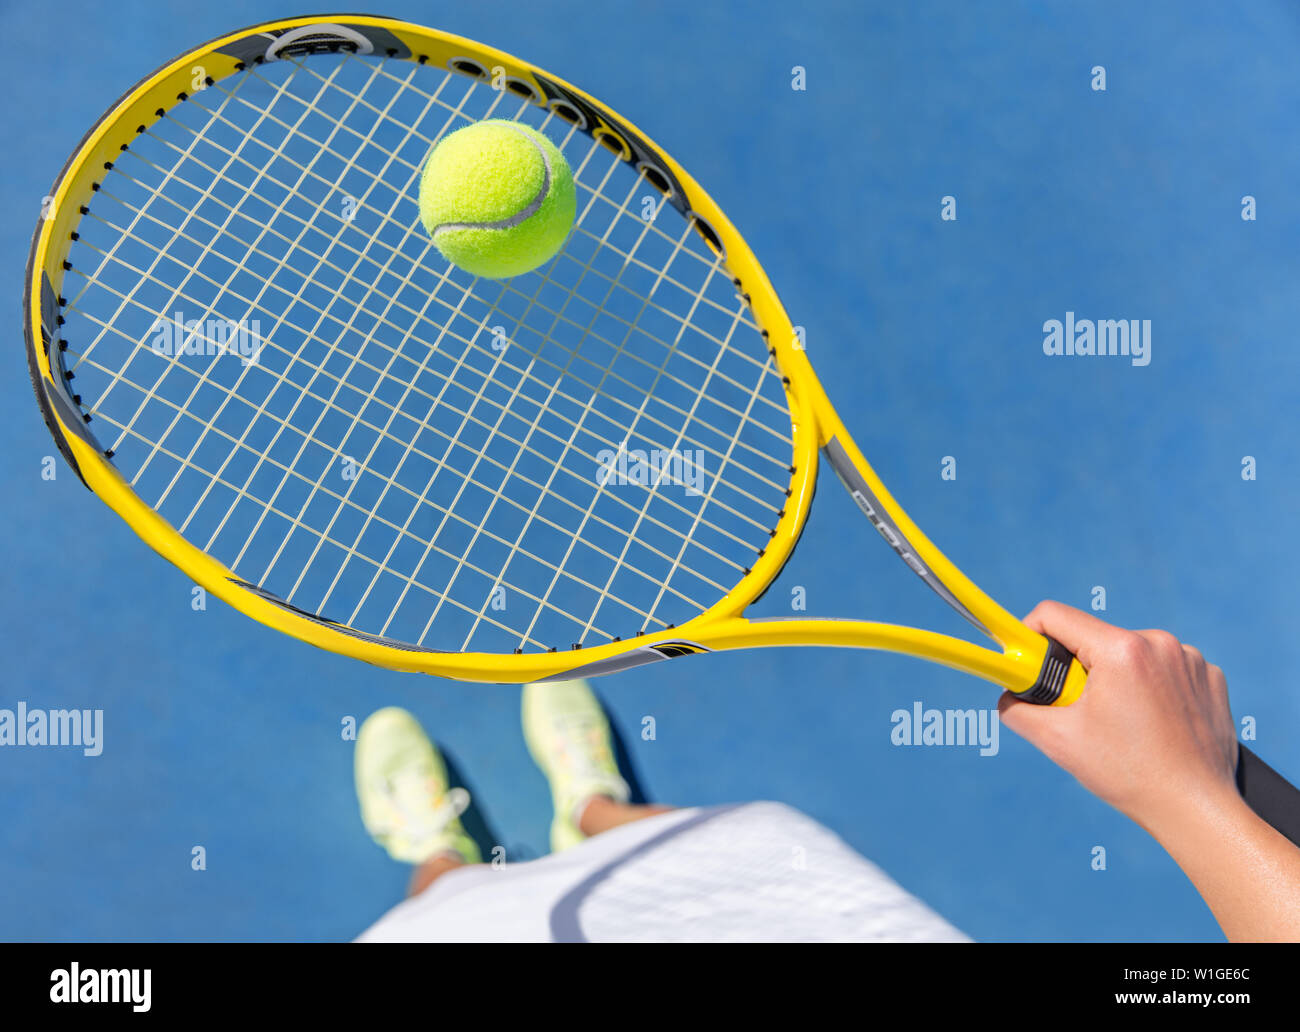 Tennis player holding yellow ball on racket grid. Sports female athlete taking a feet selfie showing running shoes on blue hard court. POV closeup of equipment, neon yellow fashion footwear. Stock Photo